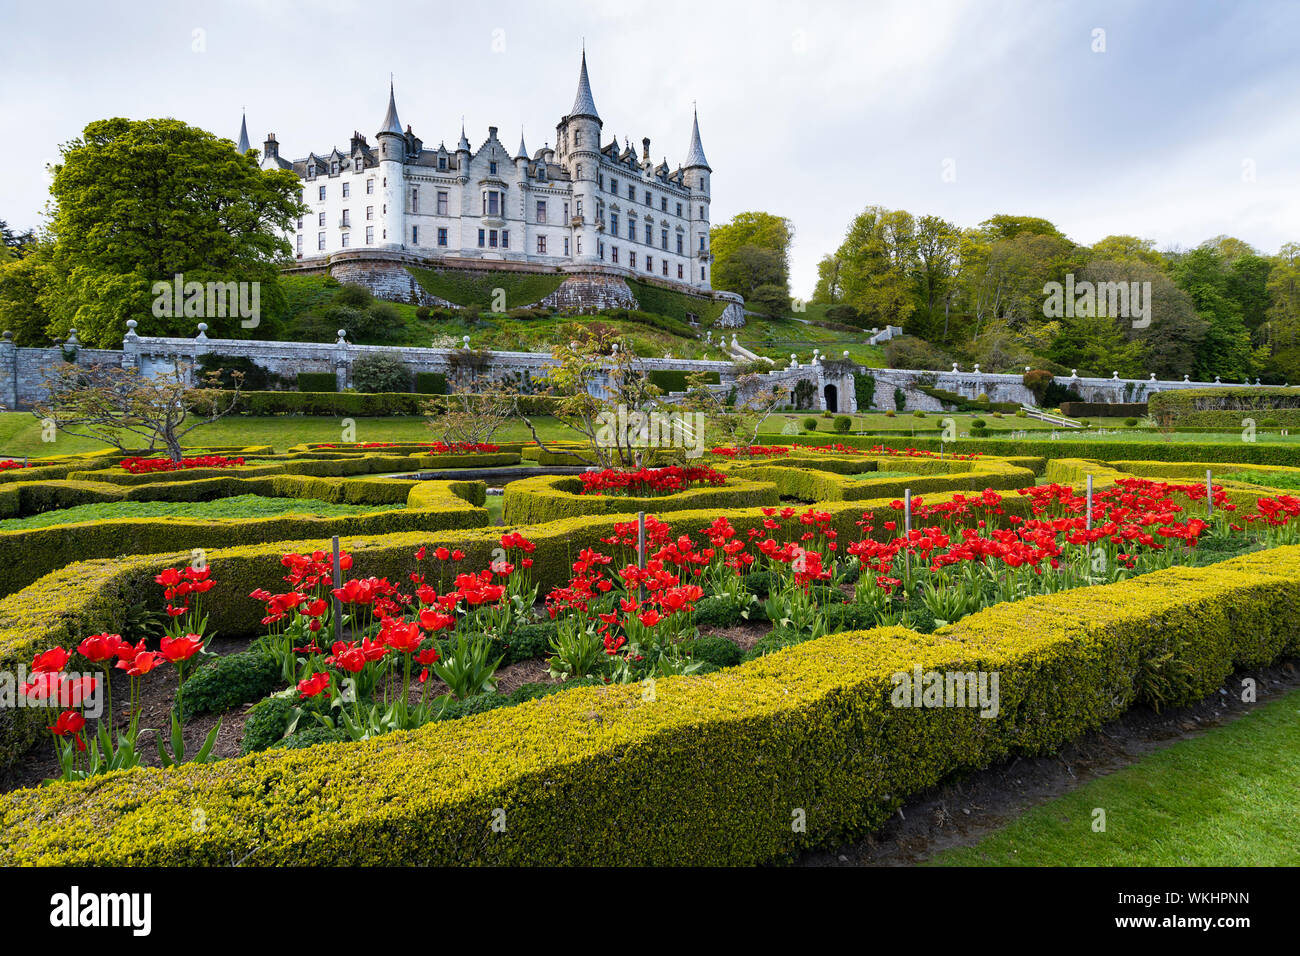 Dunrobin castle on the North Coast 500 tourist motoring route in northern Scotland, UK Stock Photo